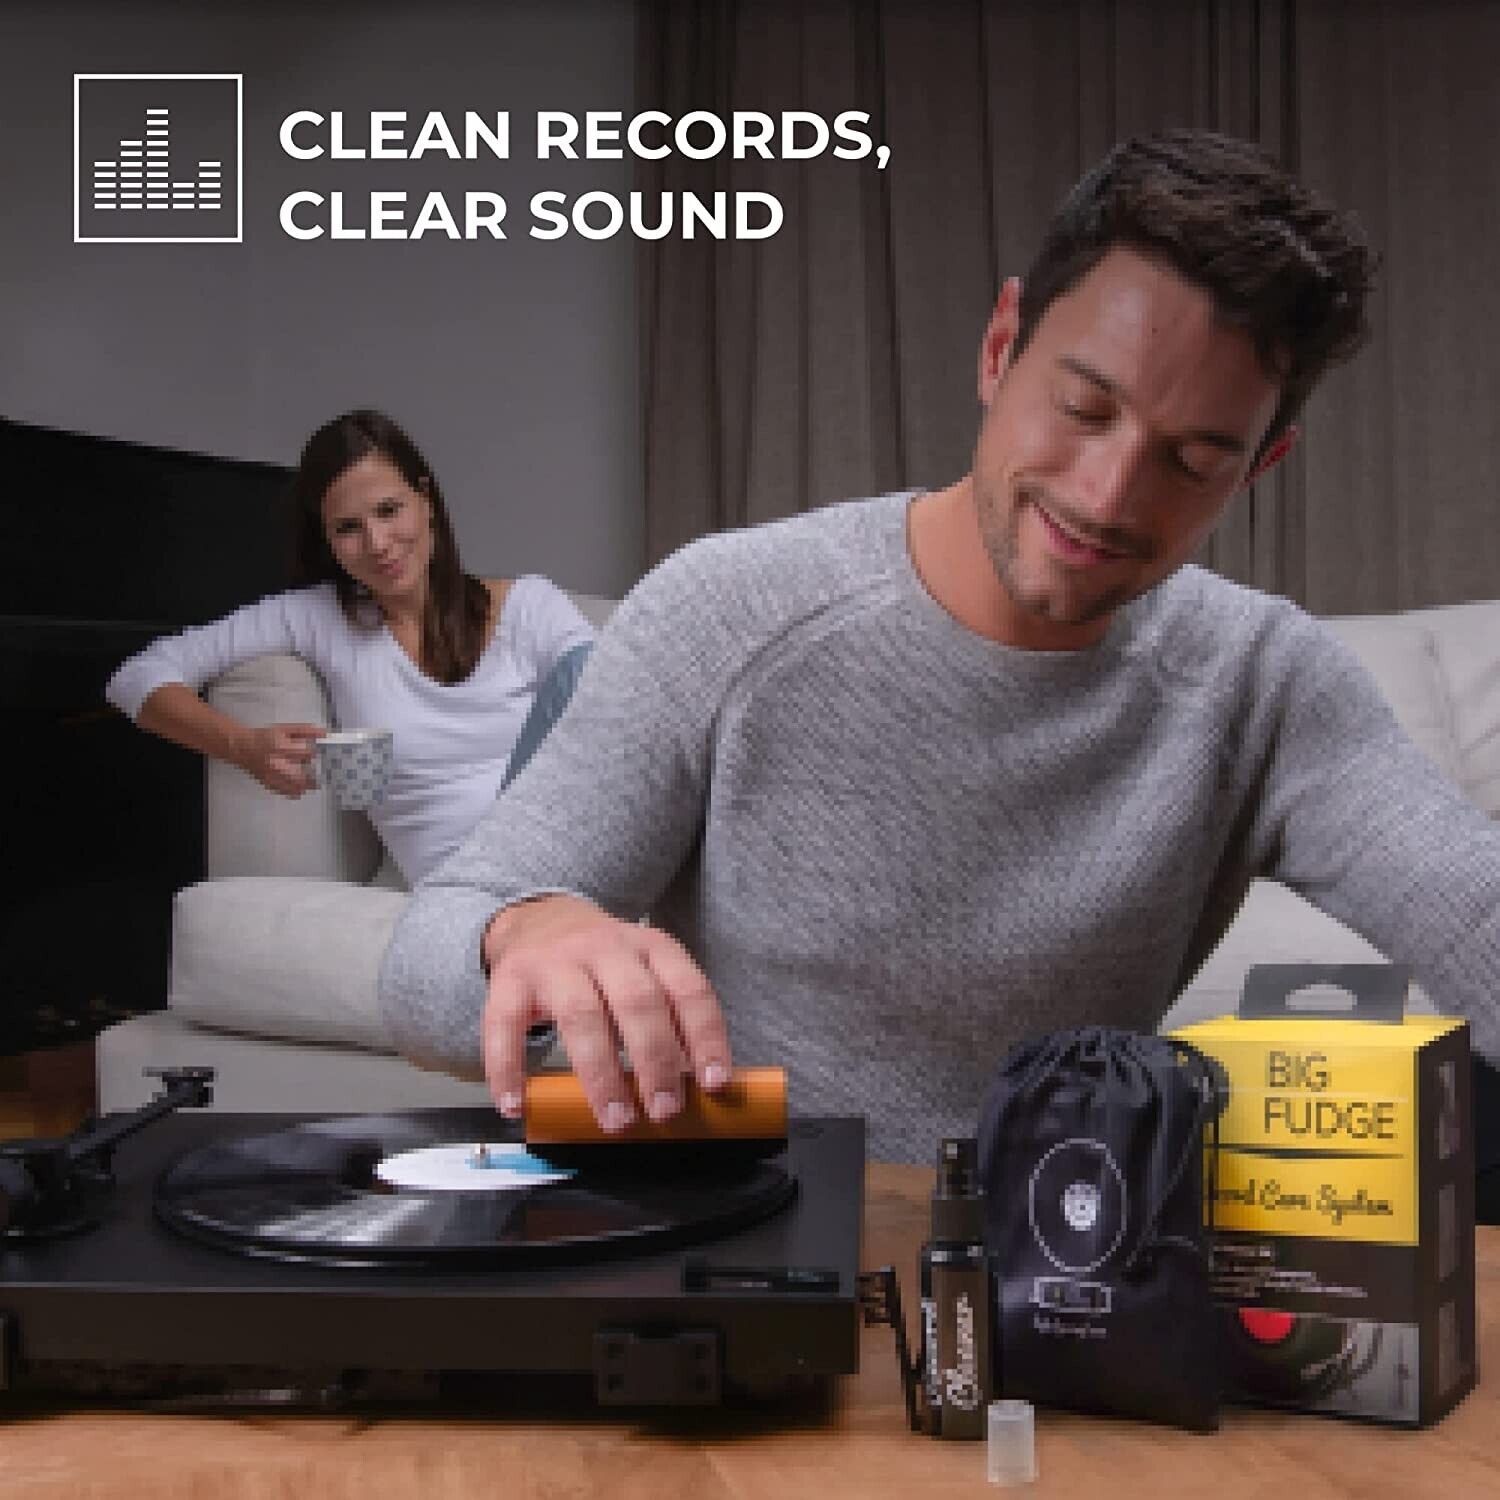 Big Fudge Vinyl Record Cleaning Kit - Complete 4-in-1 - Record Care System